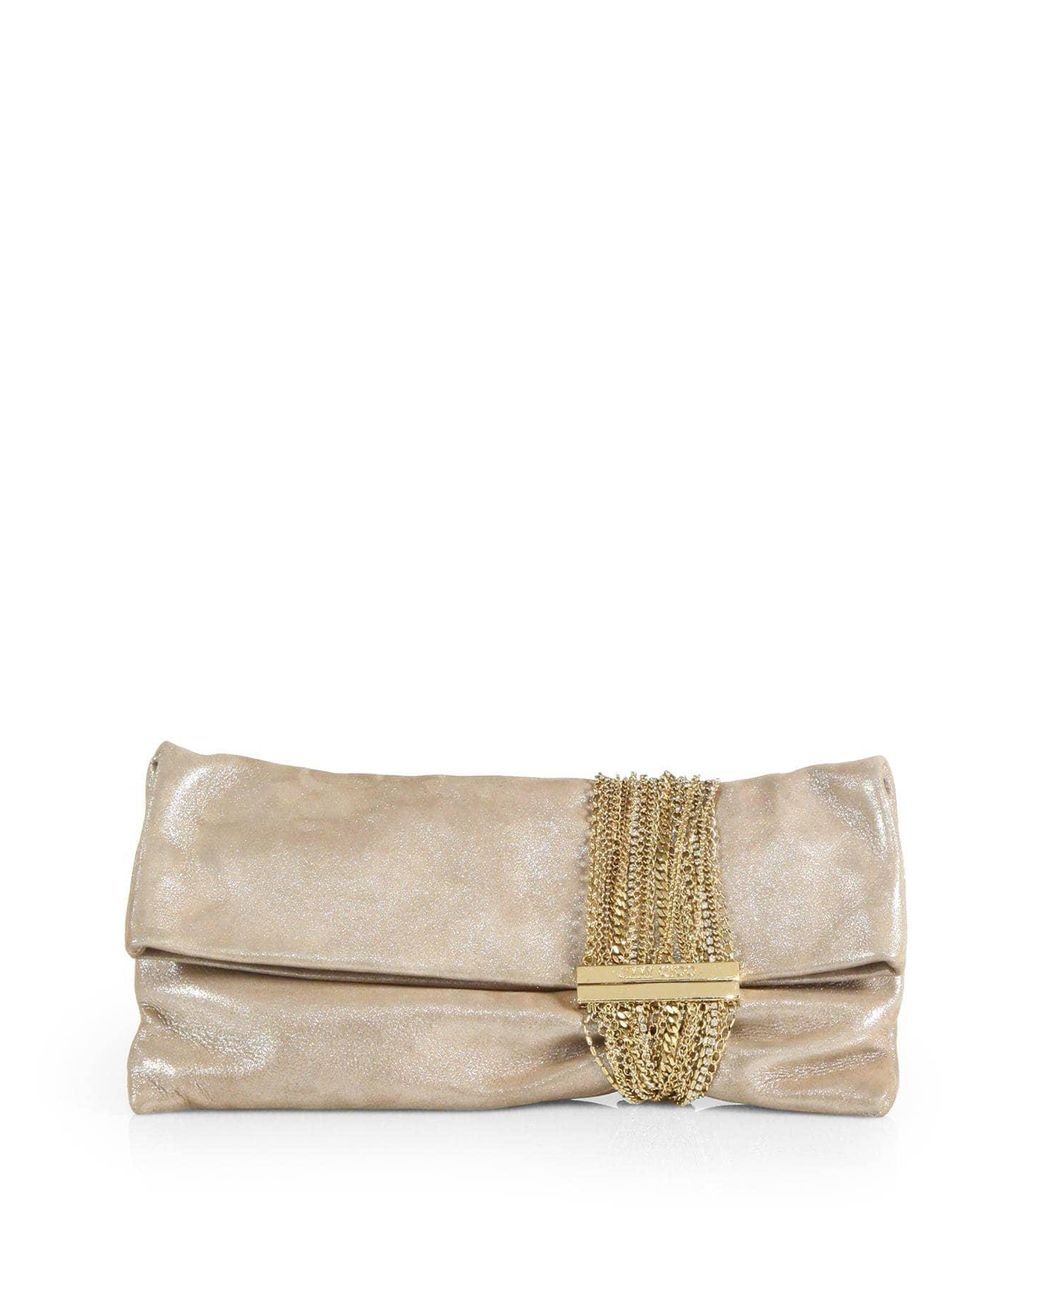 Jimmy Choo Chandra Shimmer Suede Chain Clutch in Natural